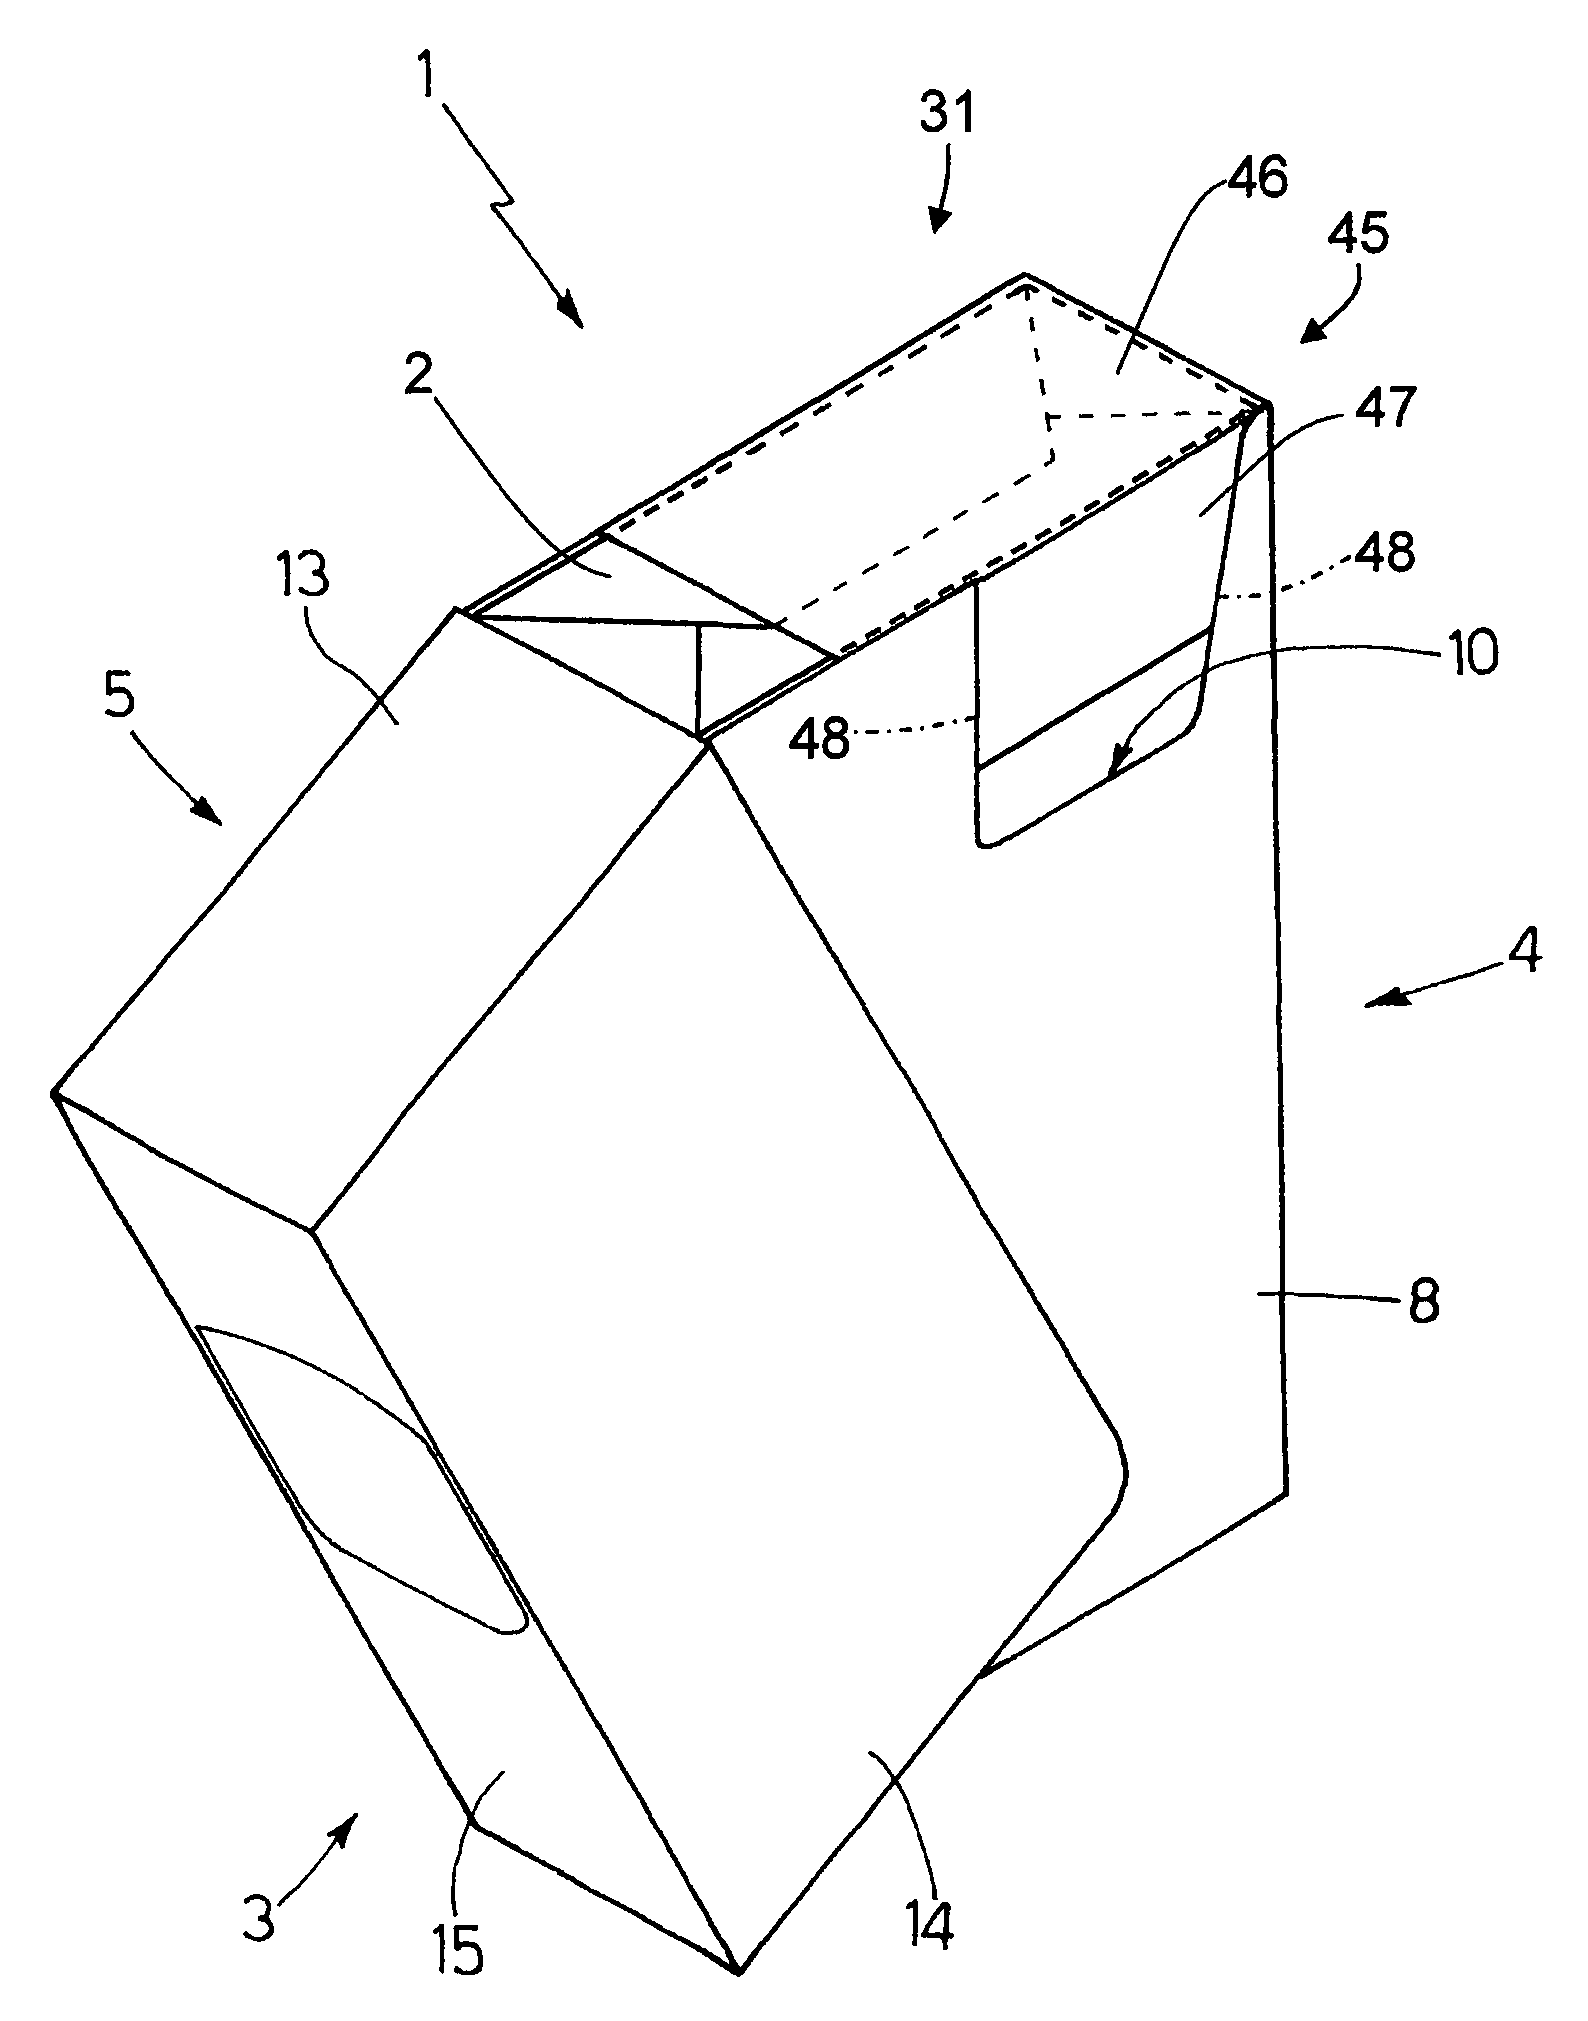 Packet of cigarettes, and method of producing a packet of cigarettes